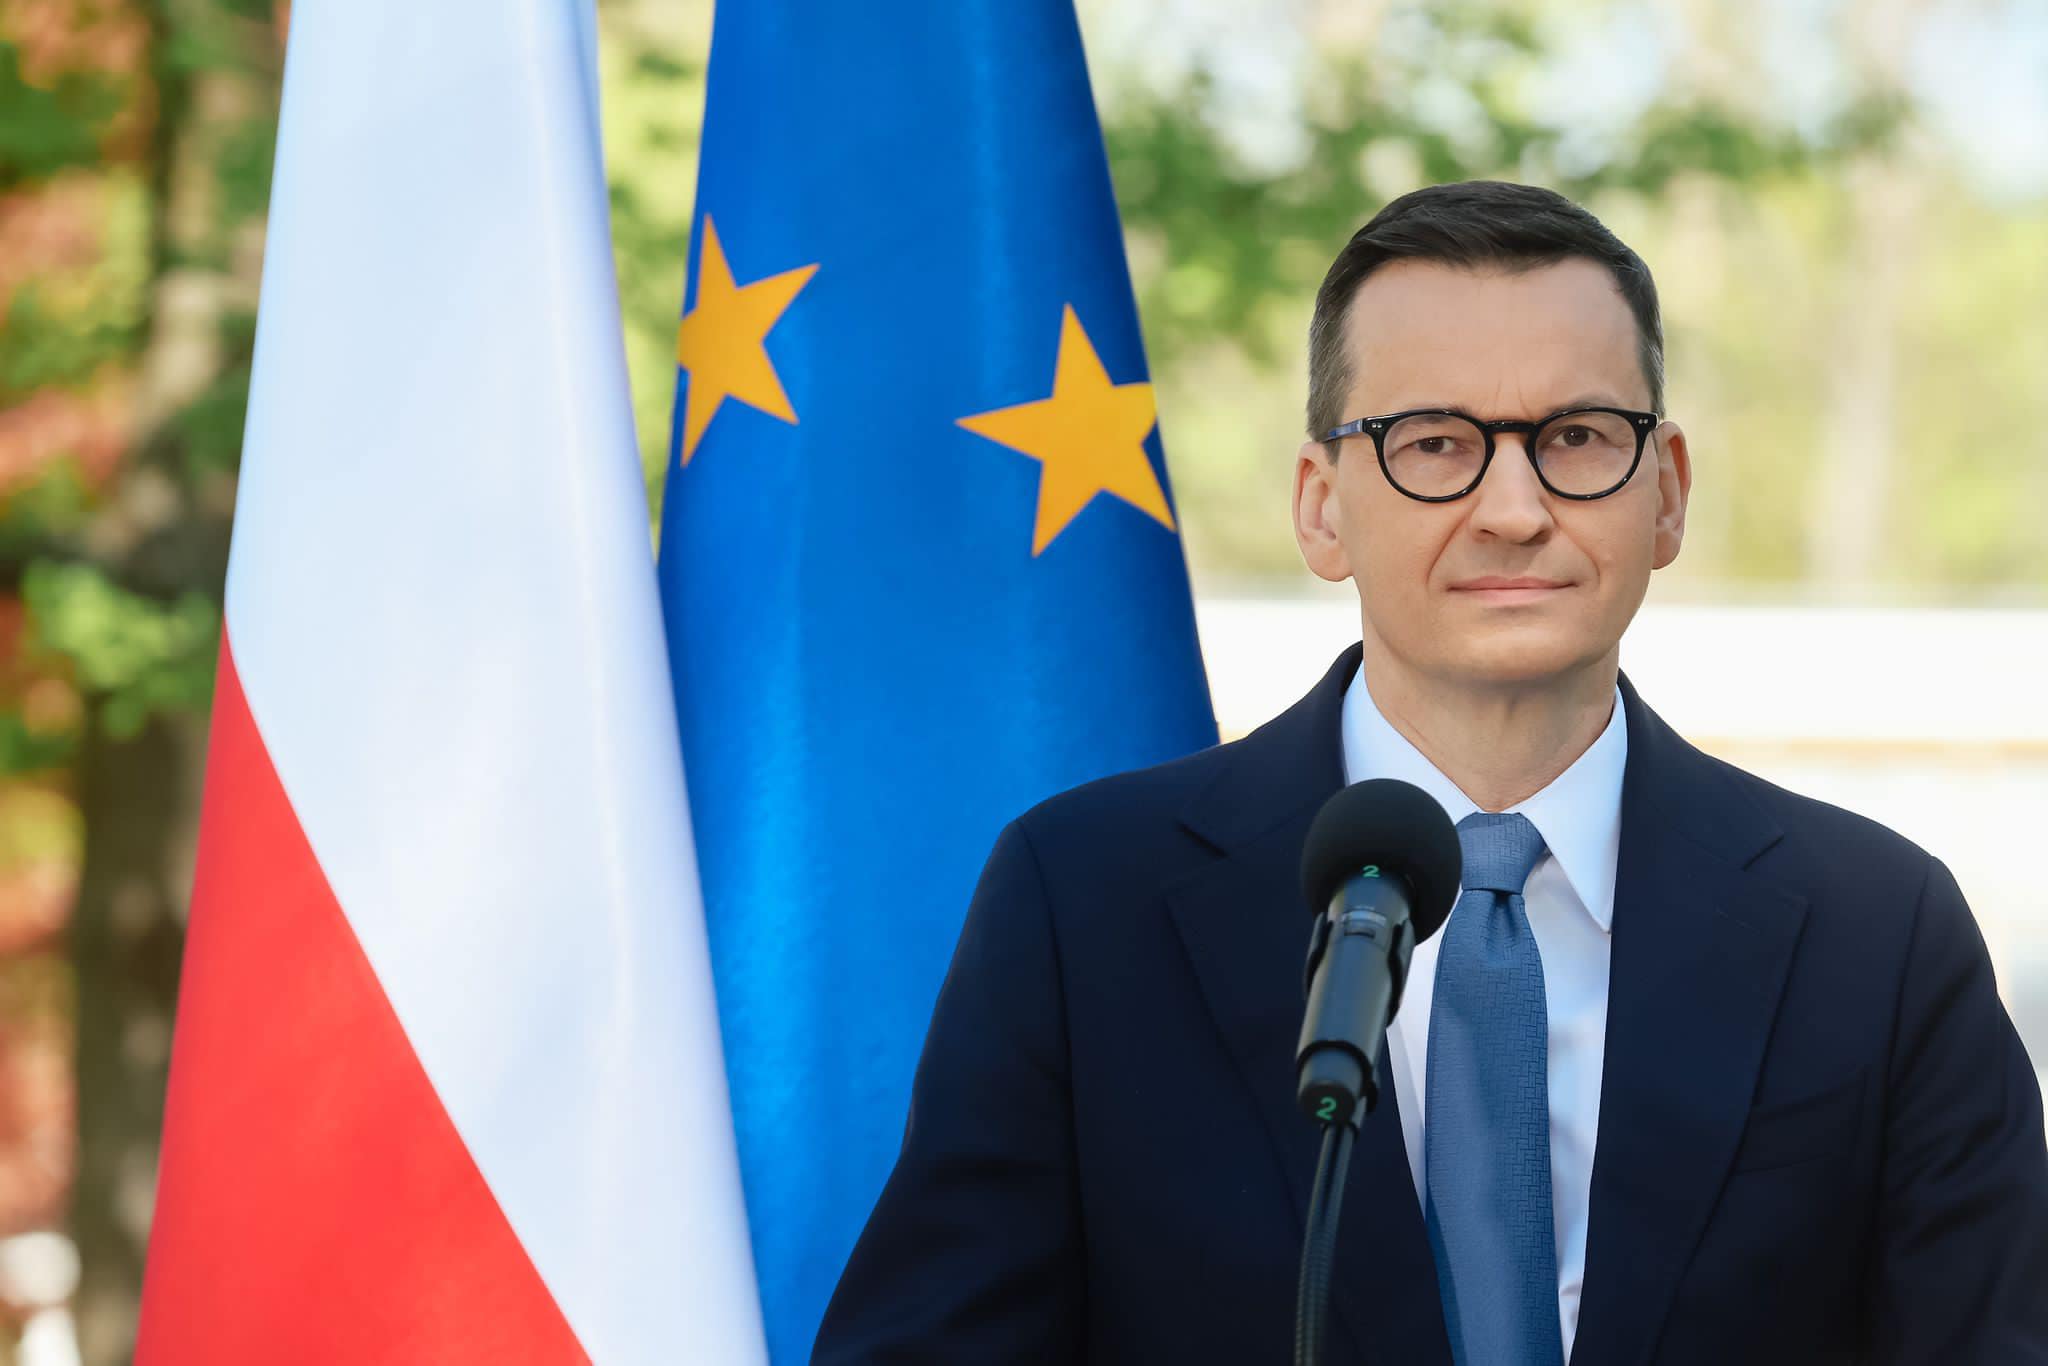 Former Polish Prime Minister to Address the Third CPAC Budapest